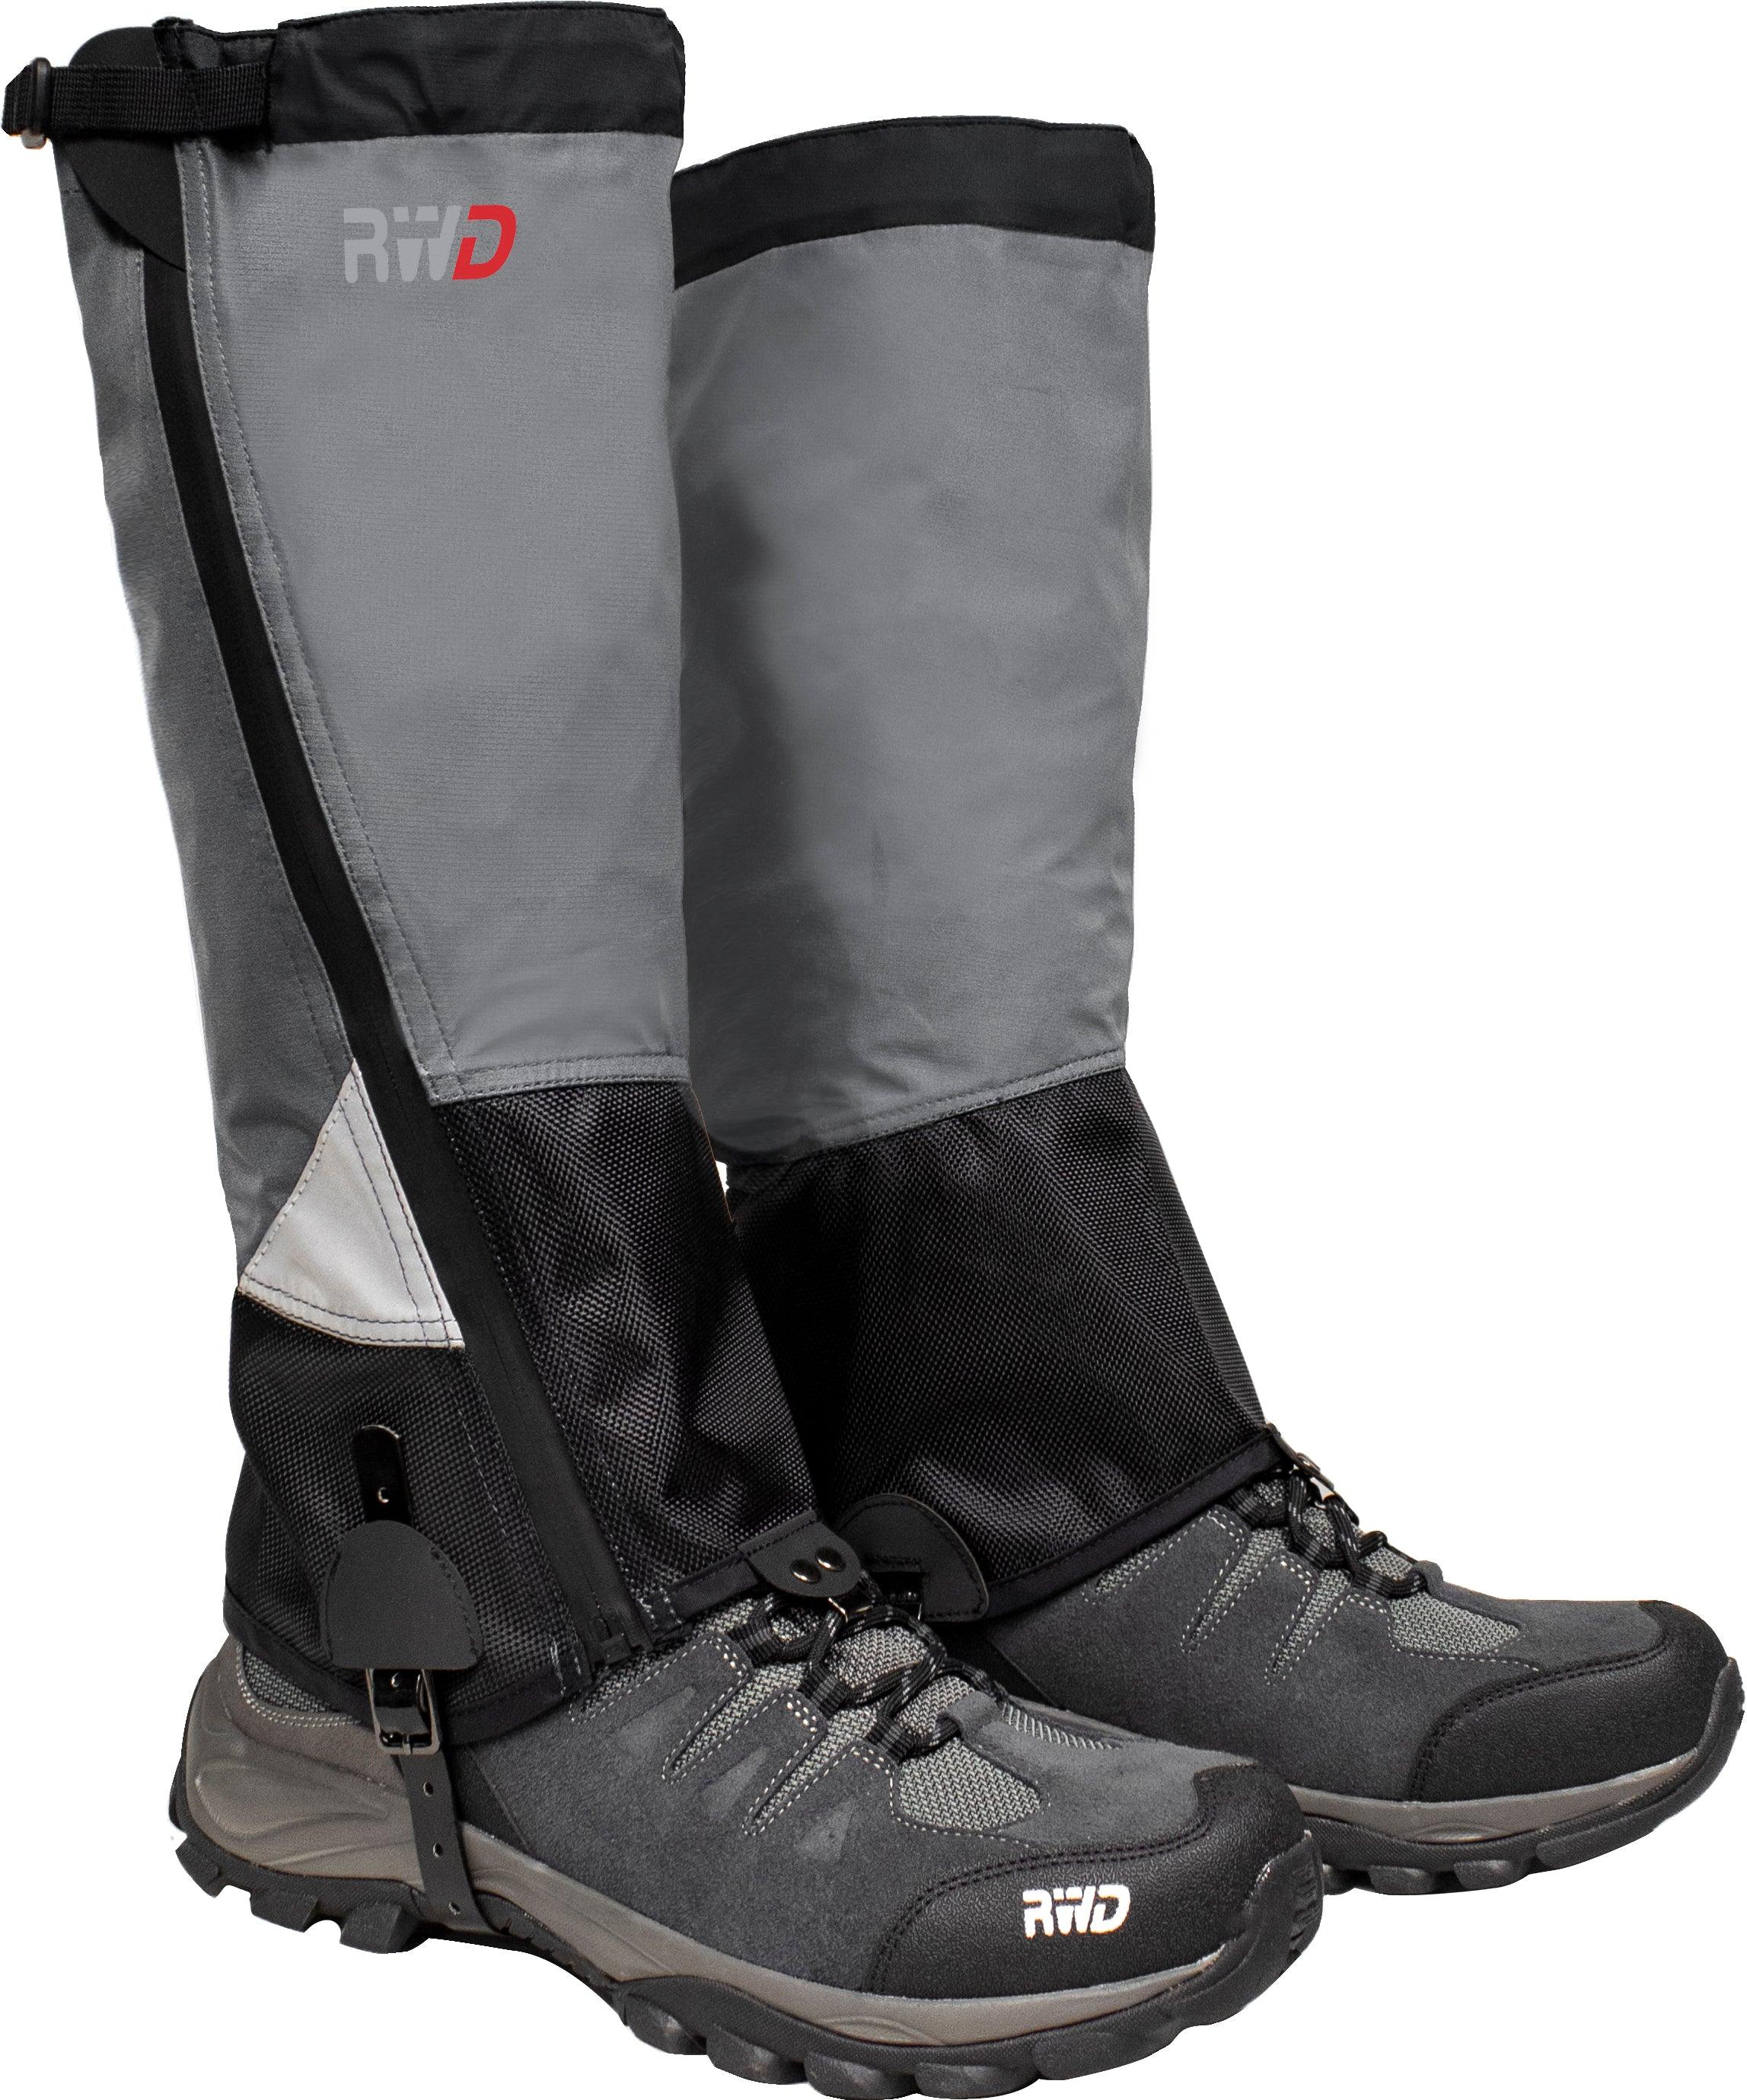 Rockwater Designs Megalite Gaiters - Leapfrog Outdoor Sports and Apparel